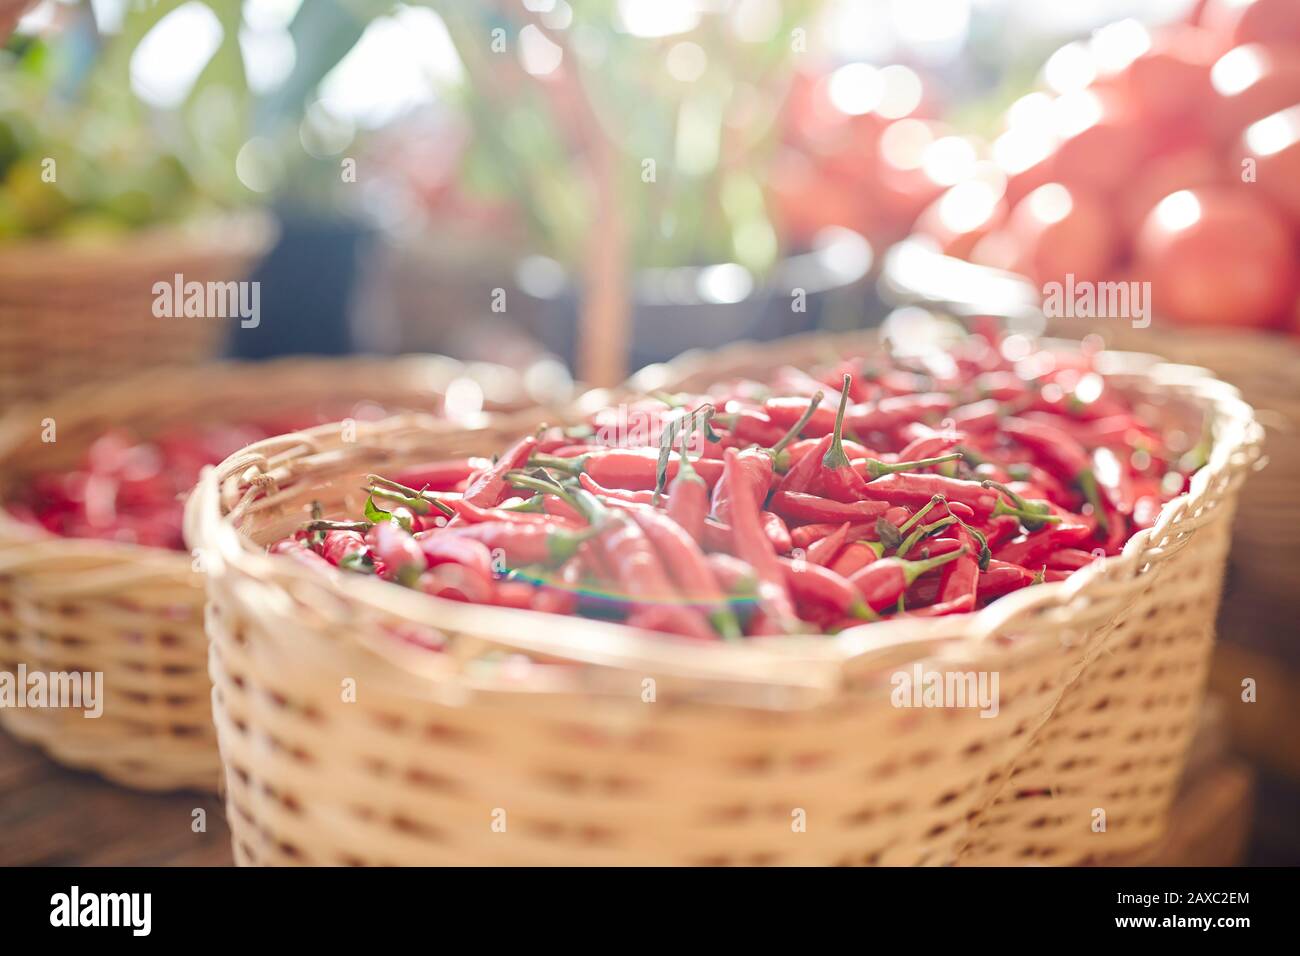 Fresh red chili peppers in basket Stock Photo